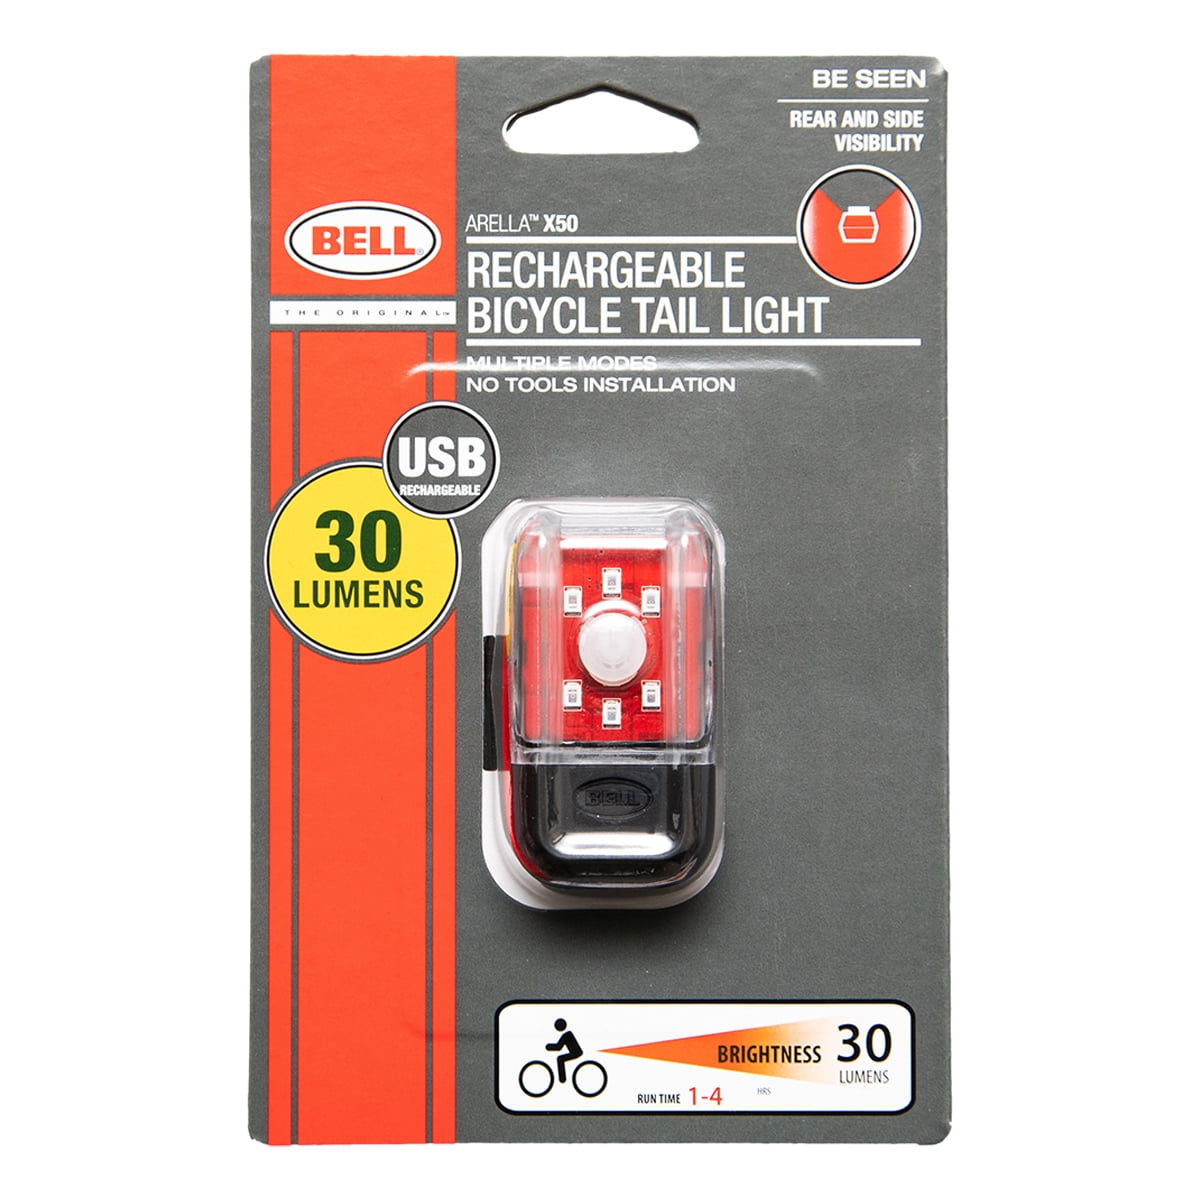 M-Wave Cobra II Lights with White and Red LED (Pair) - Walmart.com